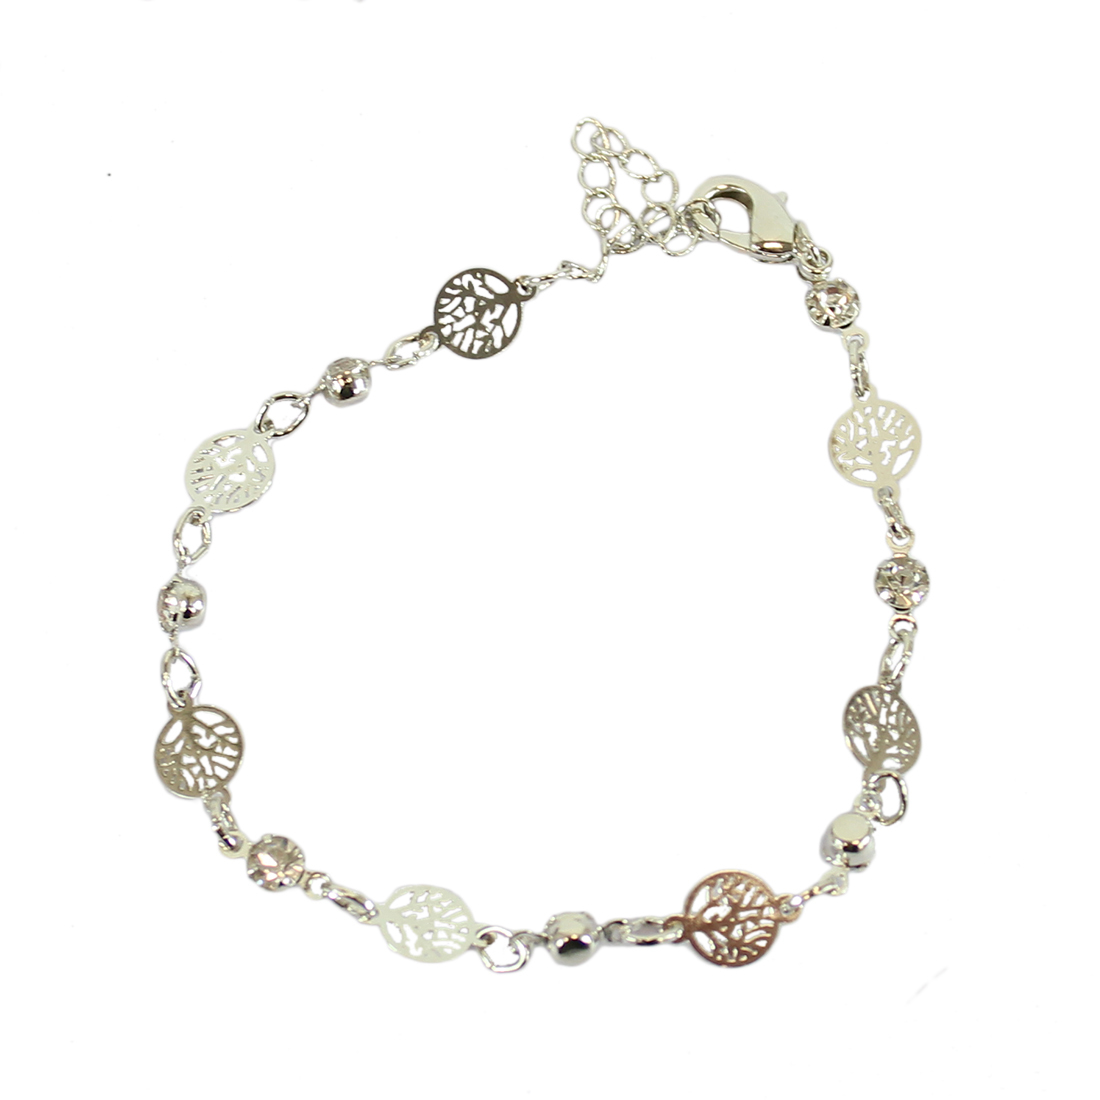 Chain bracelet with tree shapes and diamonds